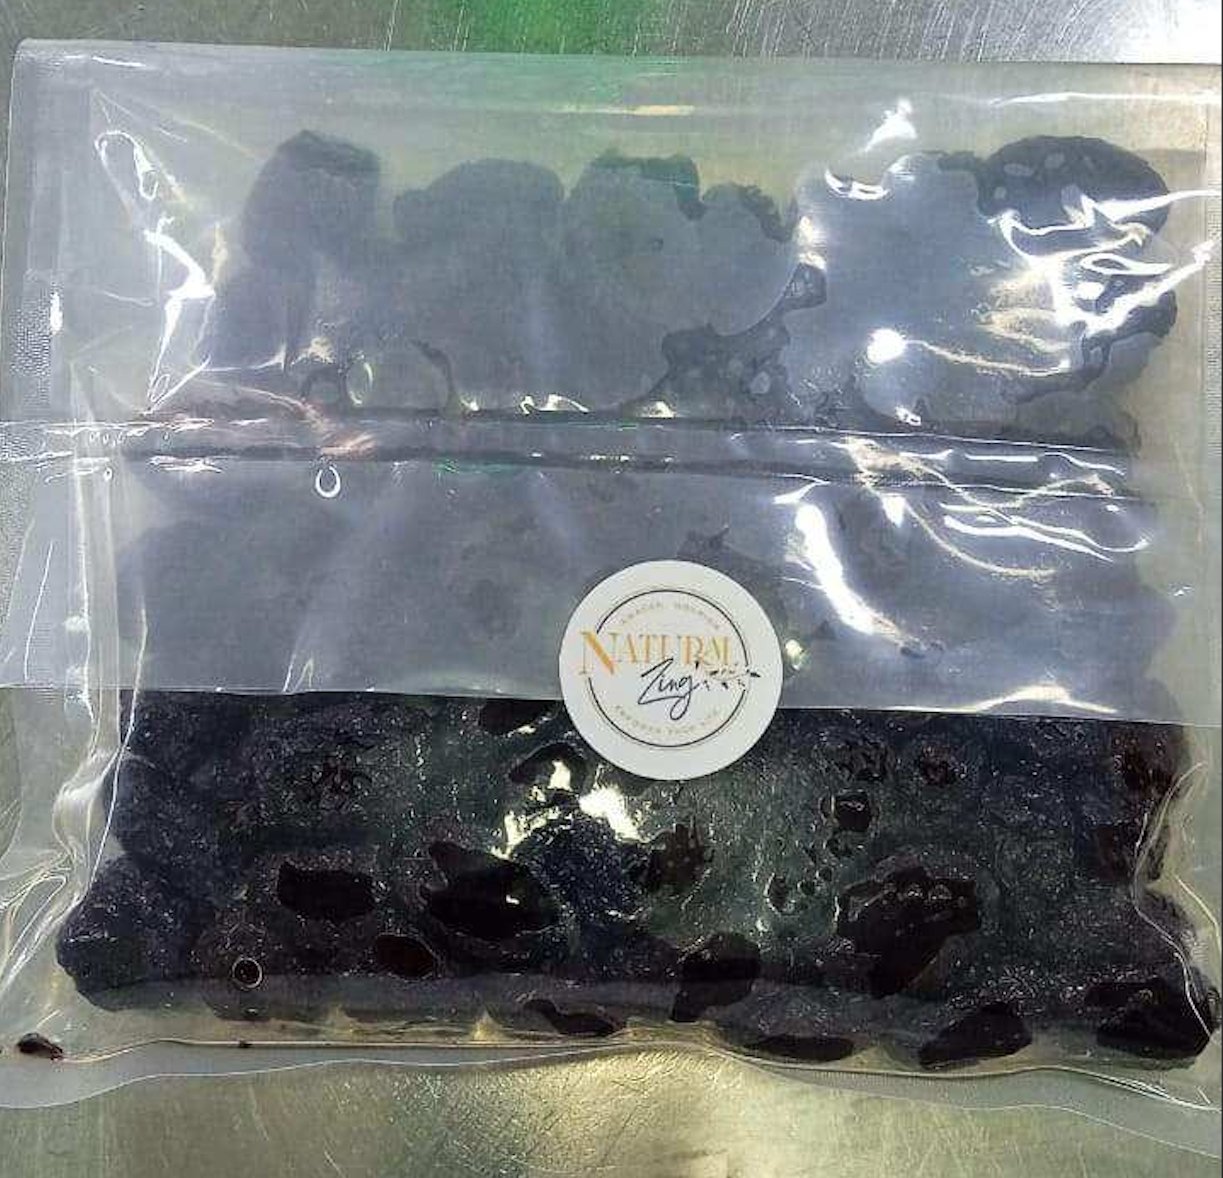 Peruvian Black Dried Olives (Salted, Pitted) 8 oz, Case of 14